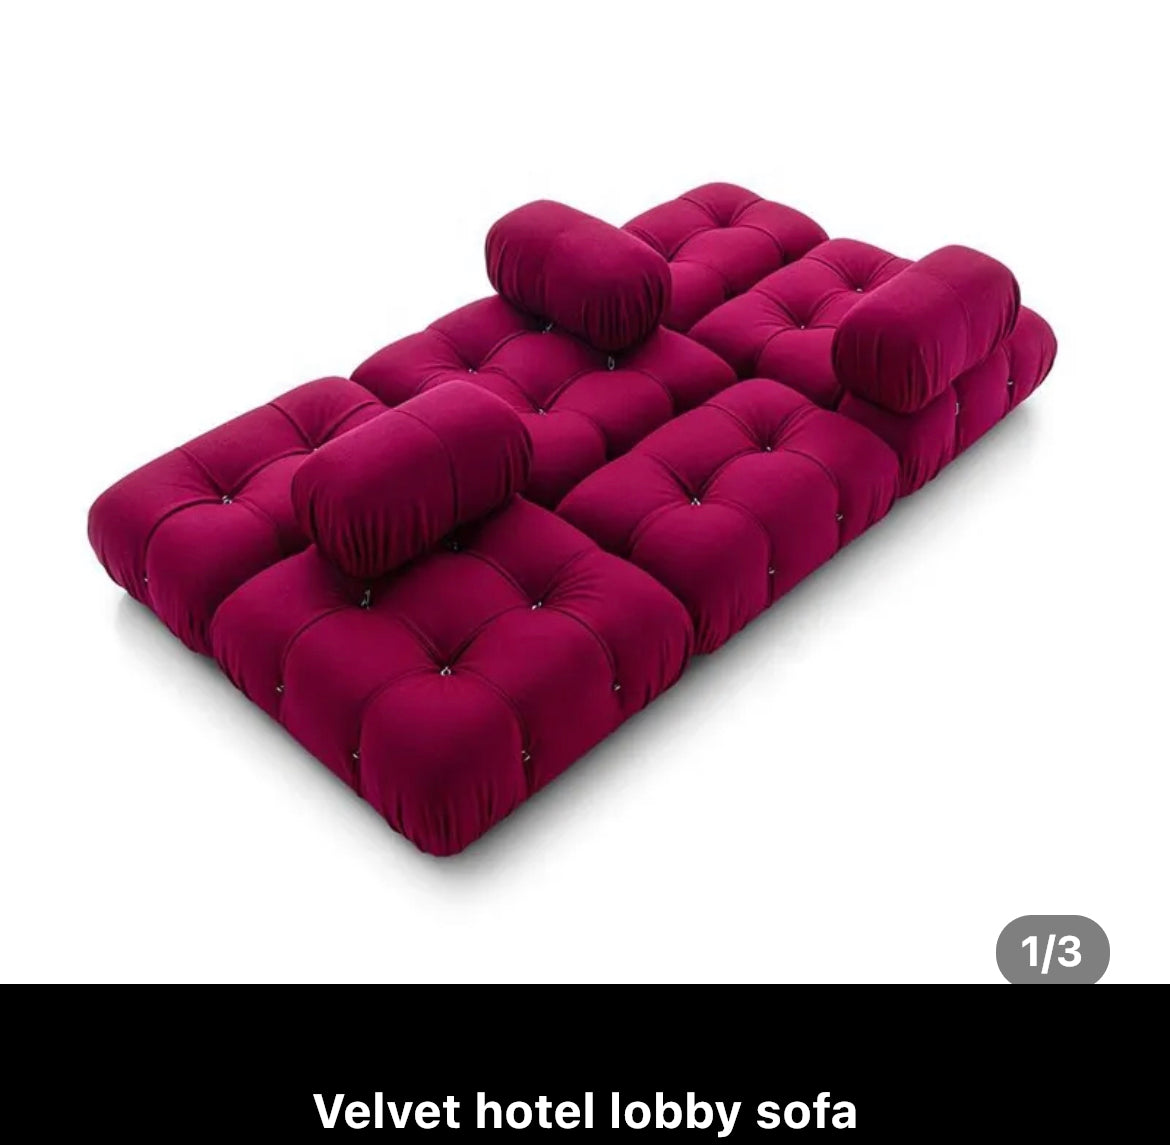 Commercial Furniture Modern Hotel Mall Lobby Furniture Luxury Office Hotel Waiting Room Sofa Set